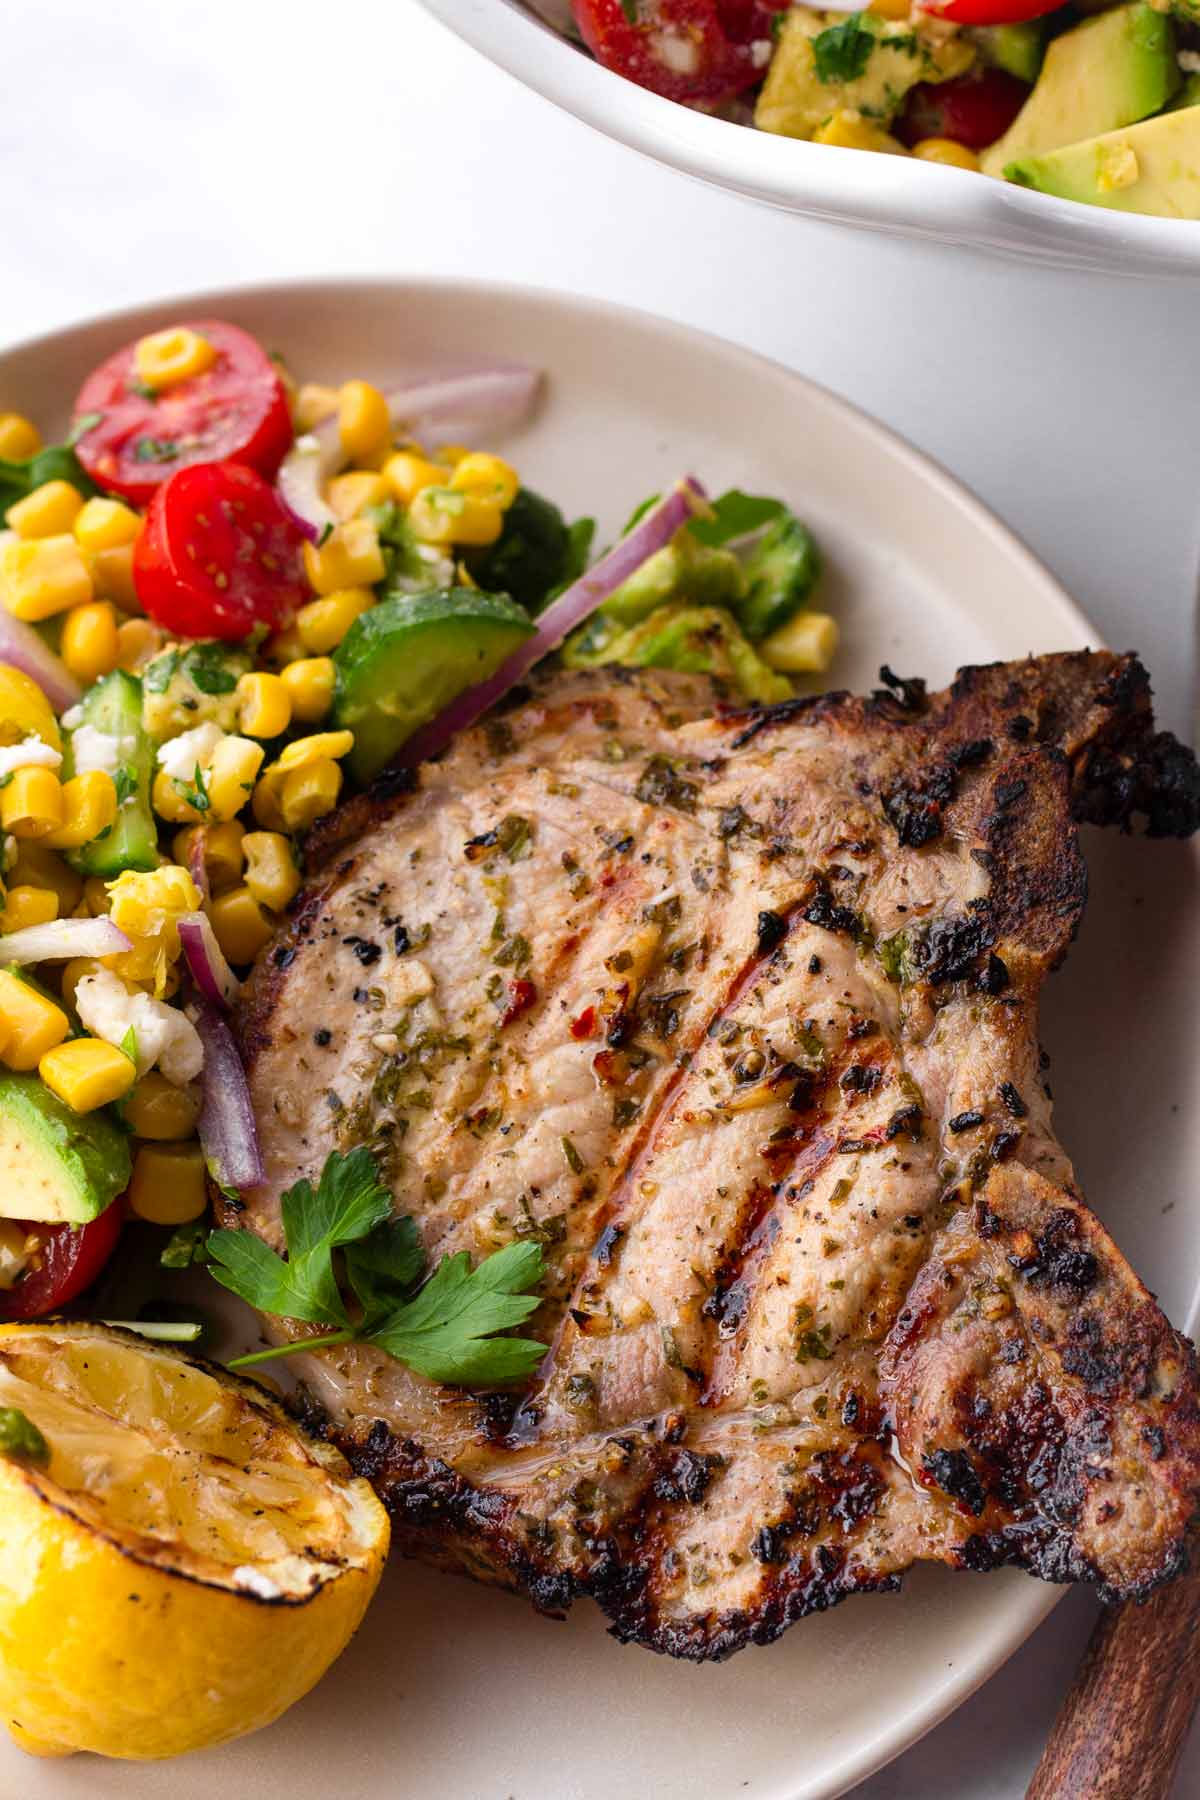 a grilled pork chop with a side of grilled lemon and corn salad